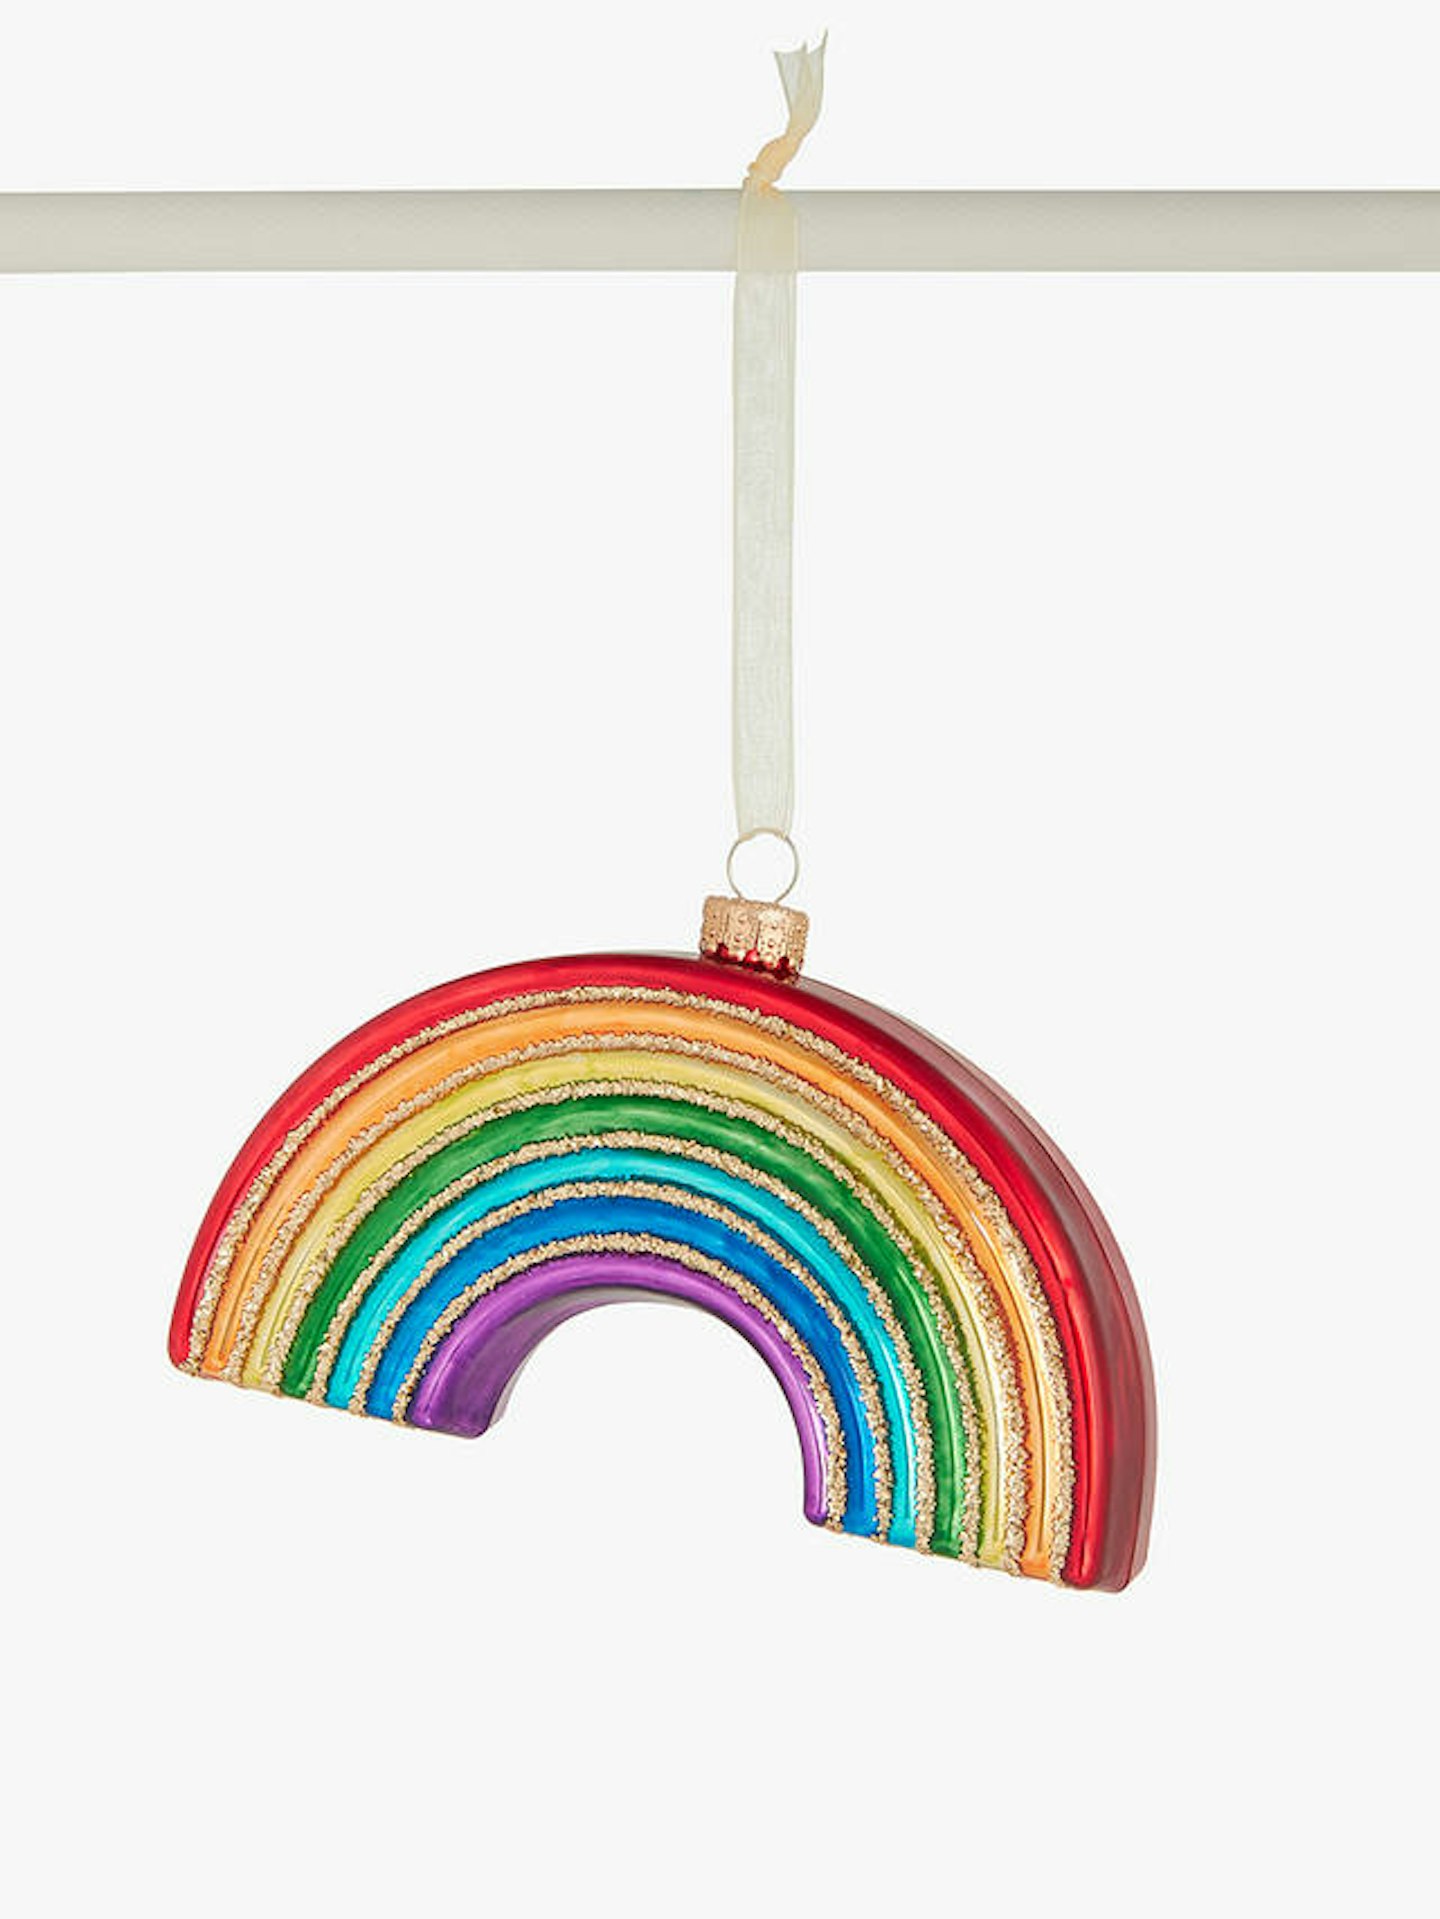 Christmas 2020: Christmas Tree Decorations Trends - Colourful and Kitsch